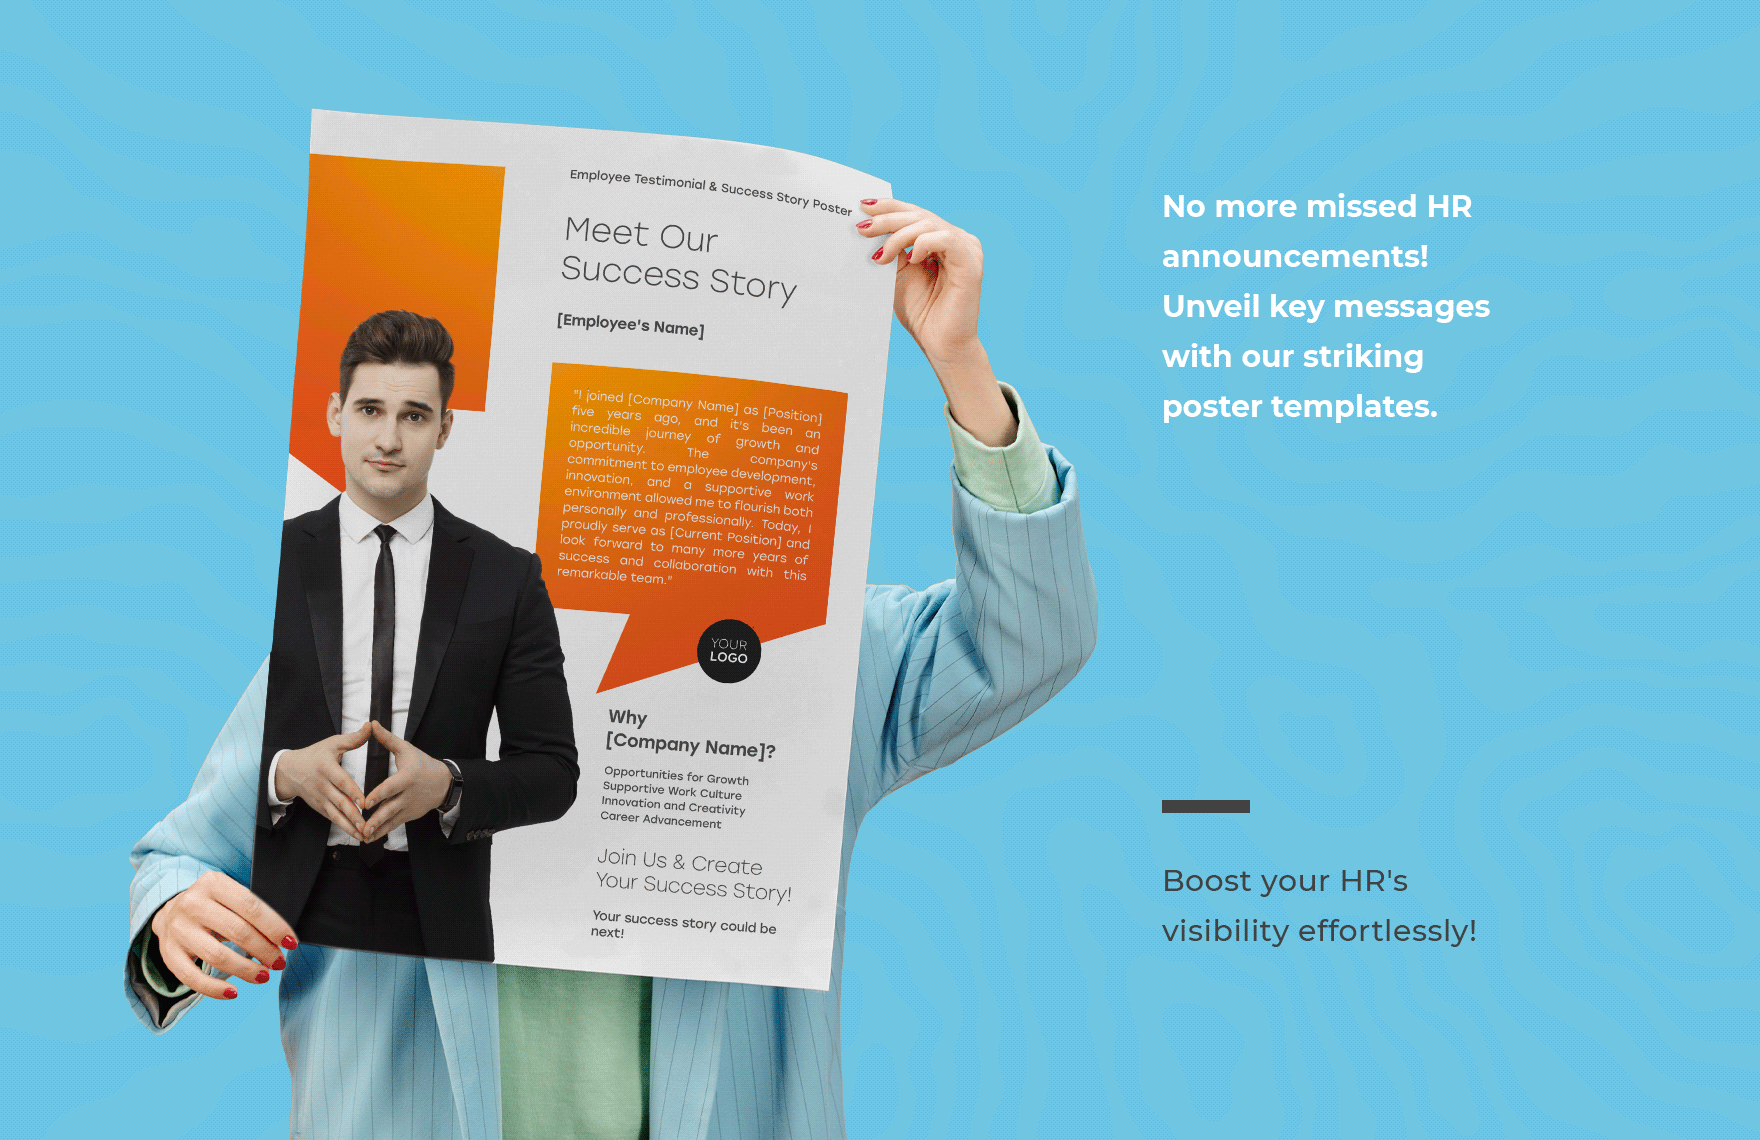 Employee Testimonial and Success Story Poster HR Template